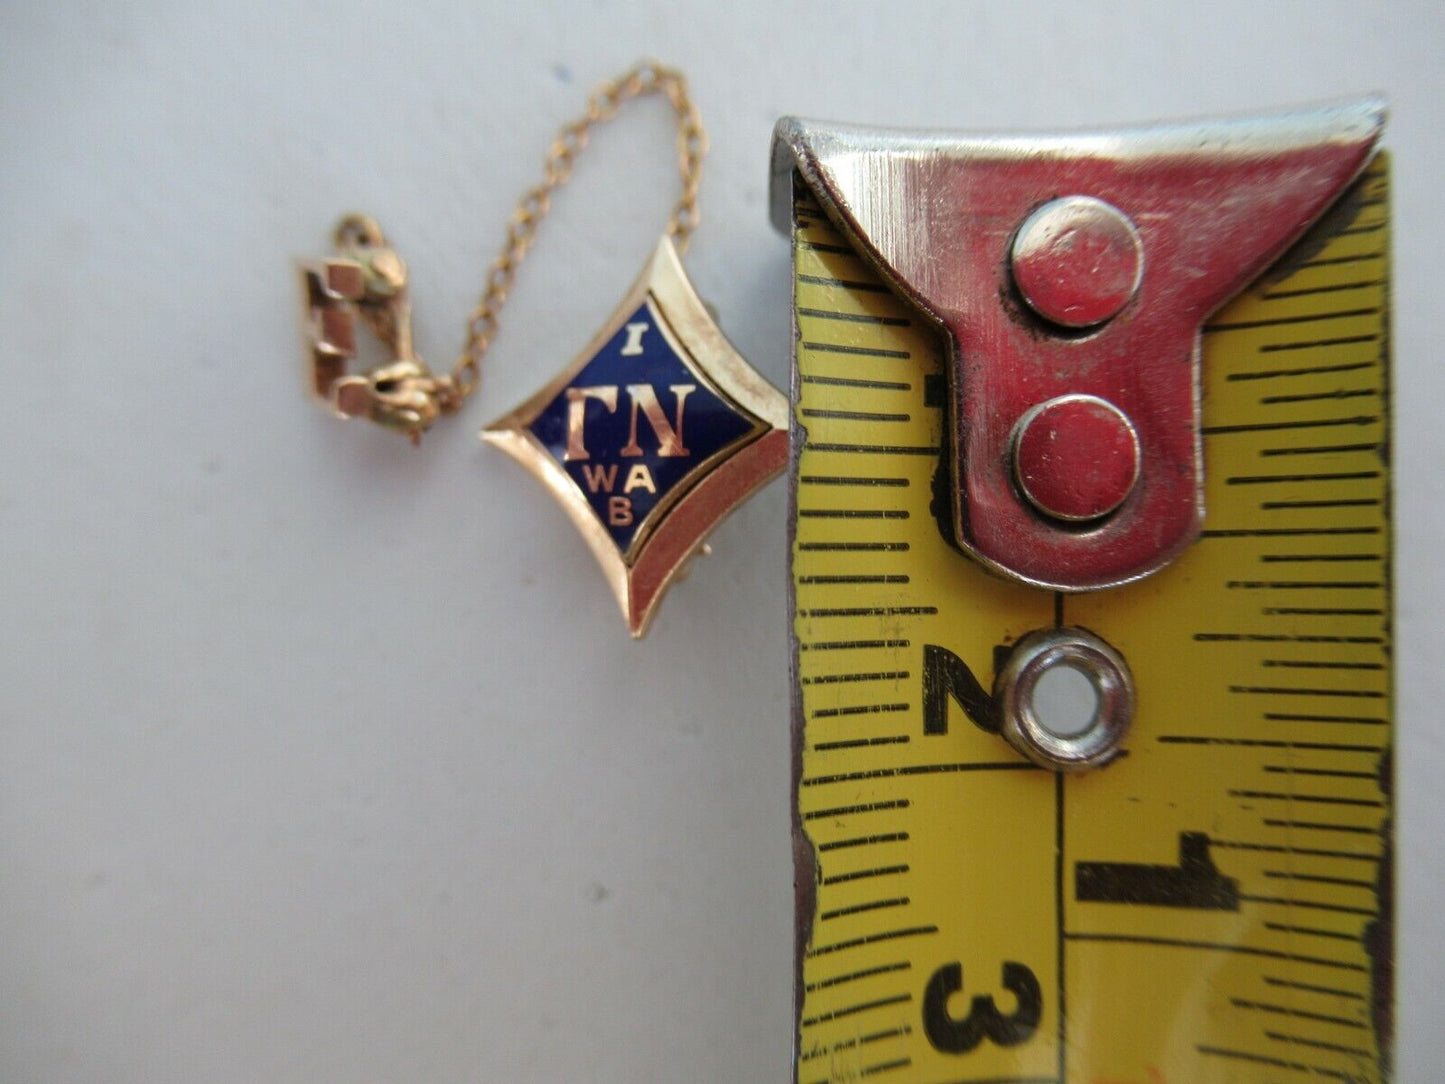 USA FRATERNITY PIN GAMMA NU. MADE IN GOLD 10K.1446